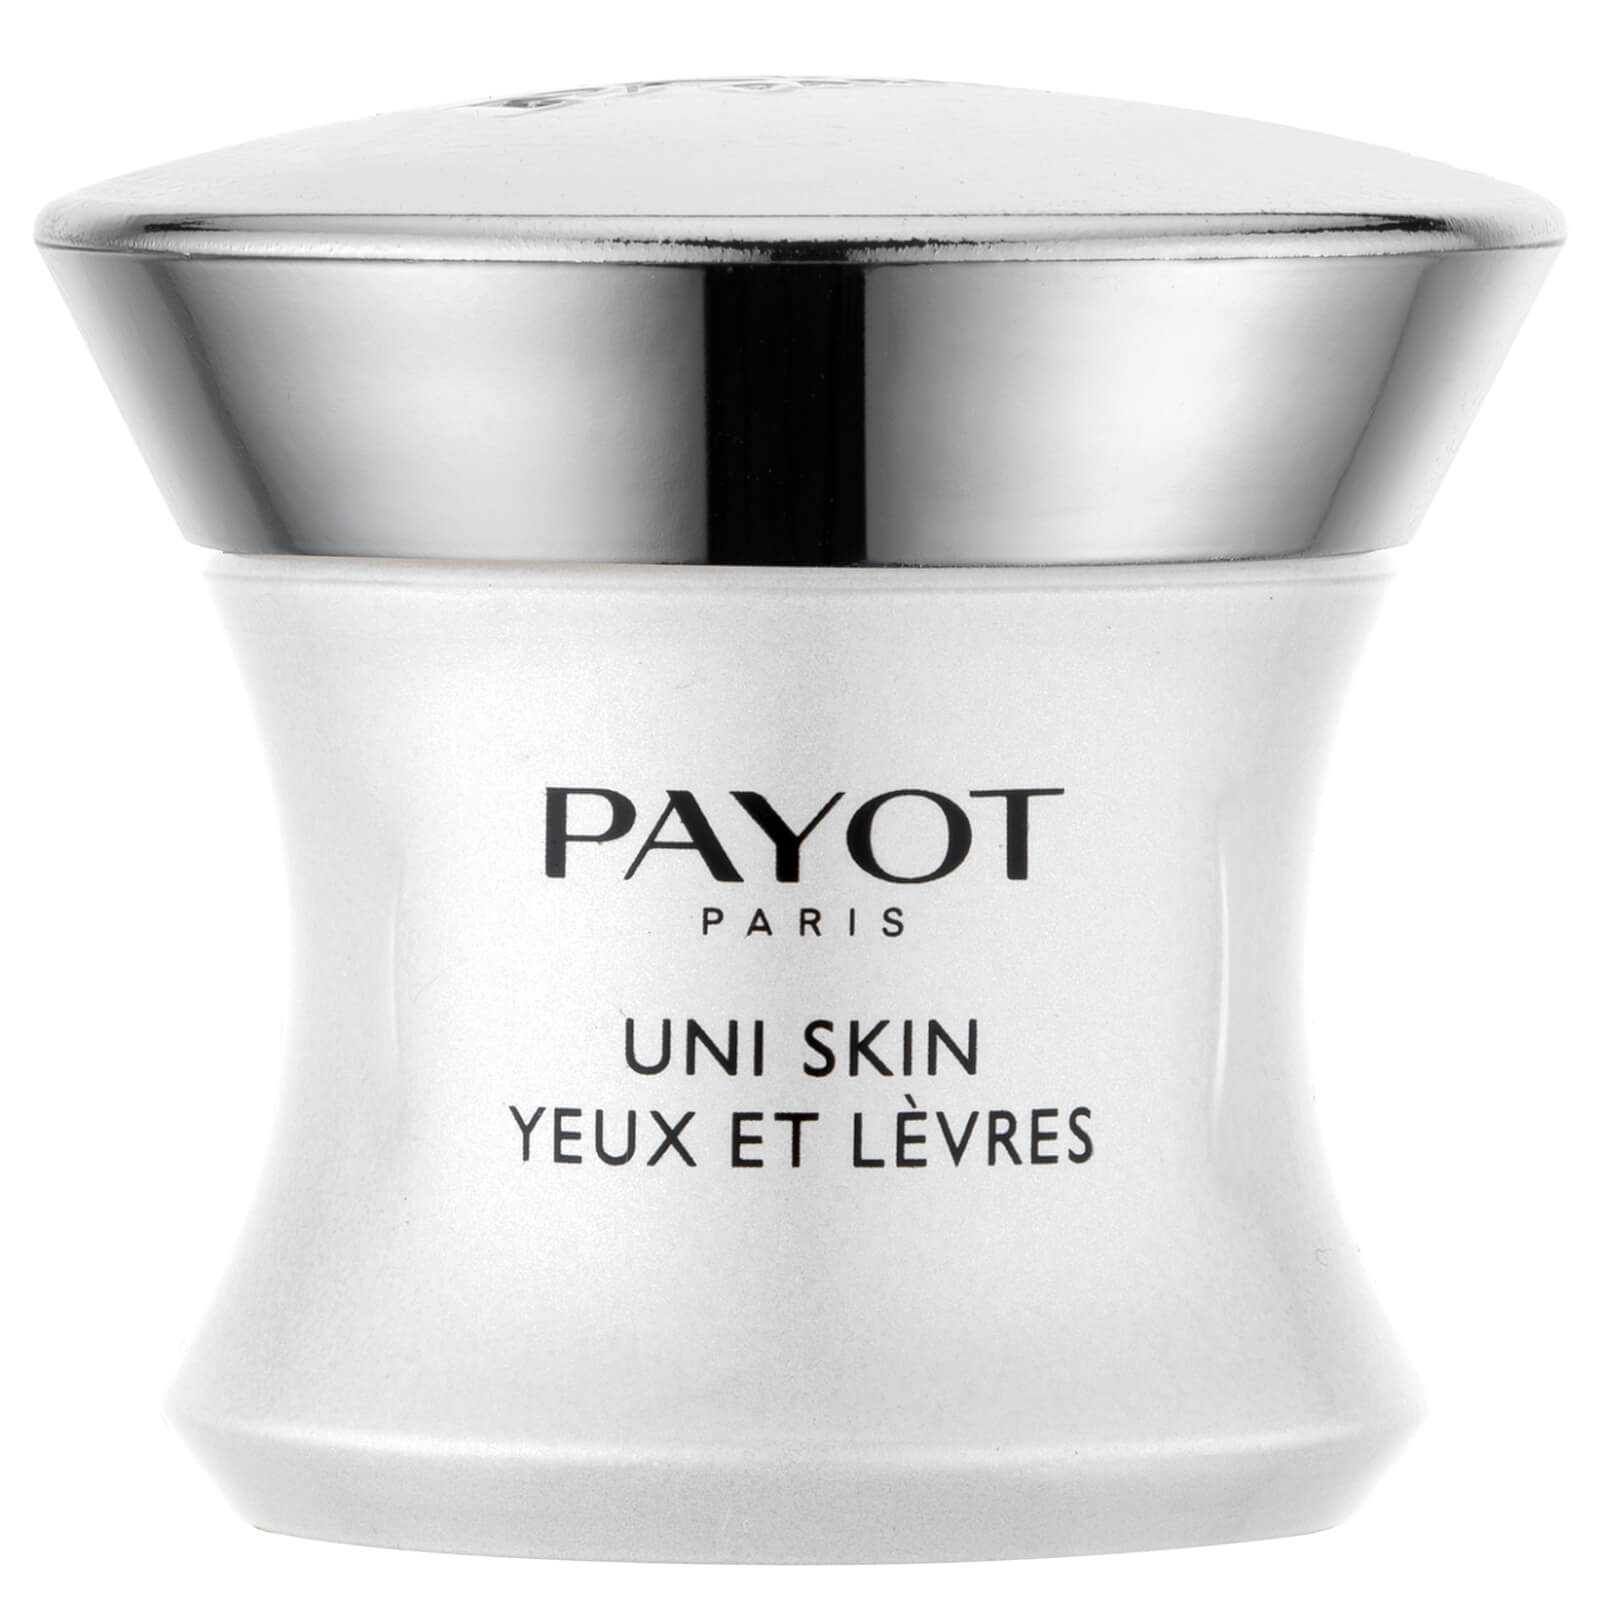 PAYOT Uni Skin Yeux et Lèvres Perfecting Balm for Eyes and Lips 15ml